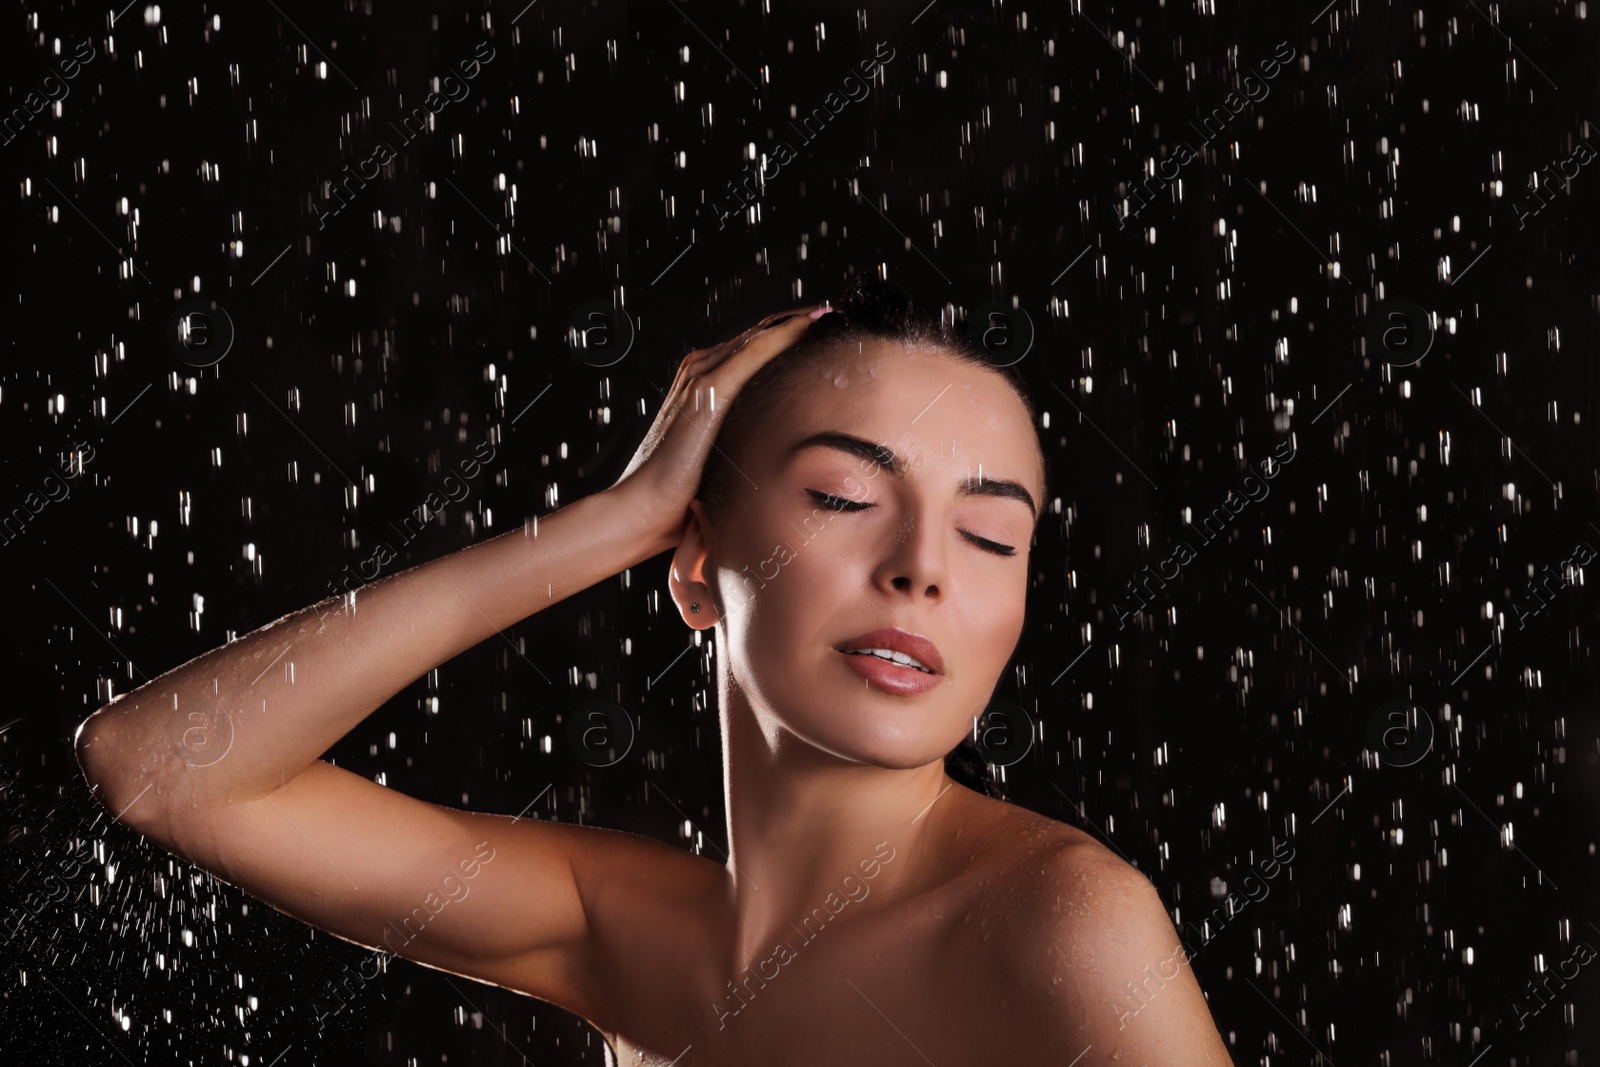 Photo of Young woman washing hair while taking shower on black background